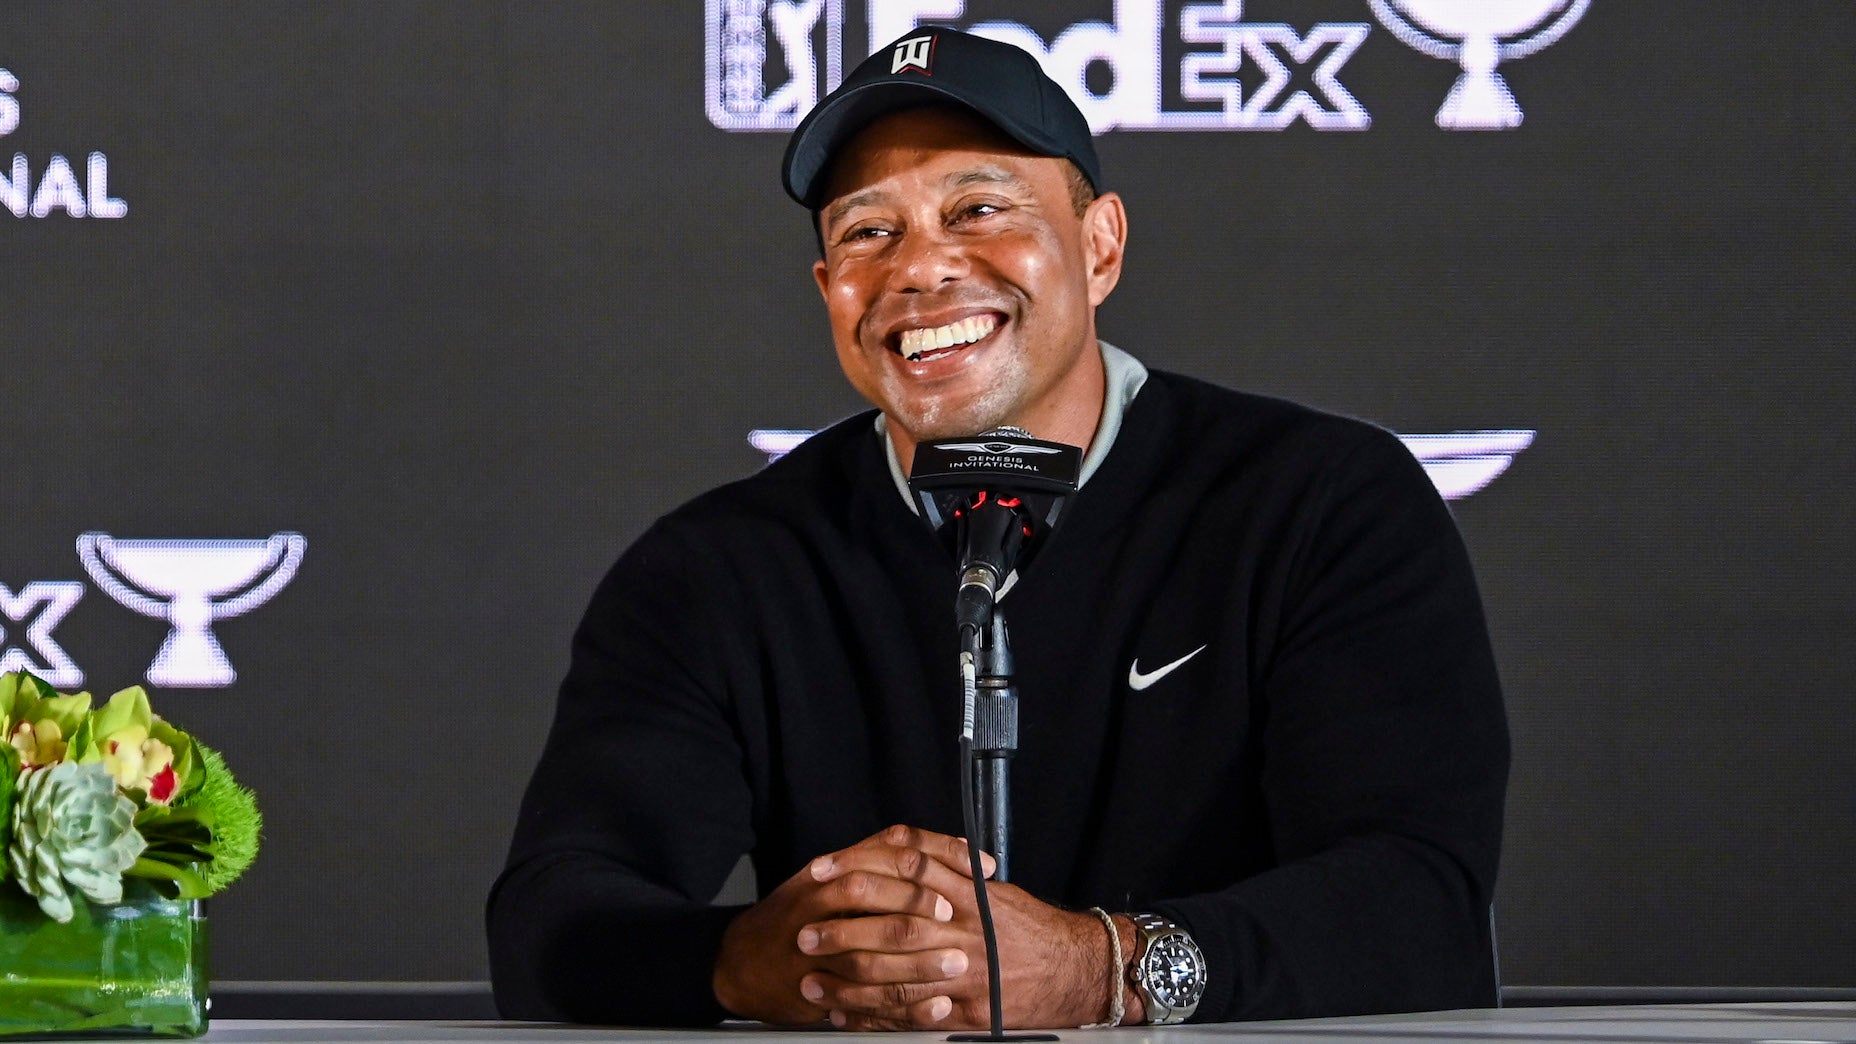 At Tiger Woods tournament, the host provides an inside look at his future